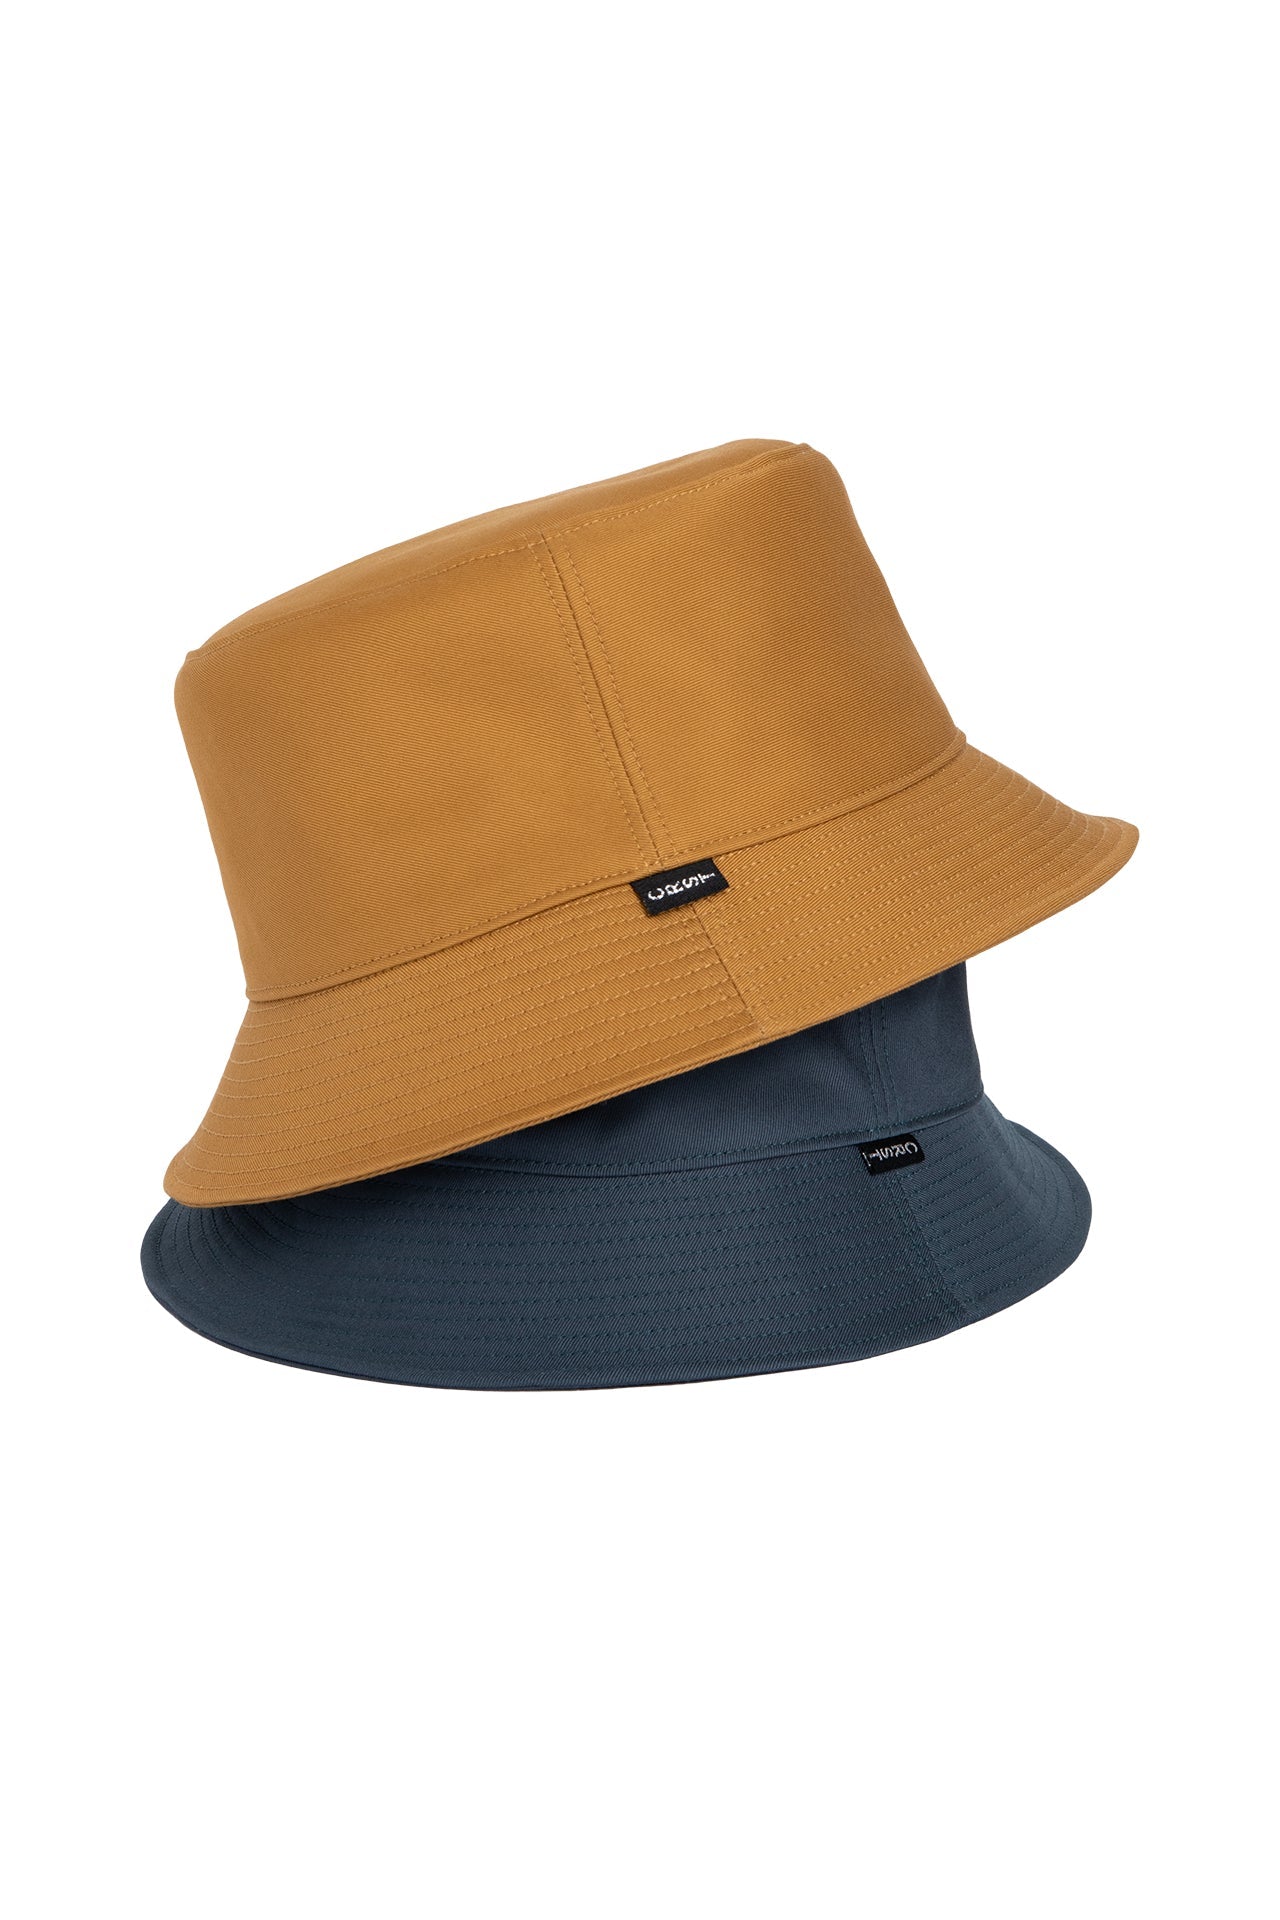 Two bucket hats in Mustard Yellow and Petrol Blue colors, showcasing Crest label. Crafted from premium Japanese Cotton Twill.